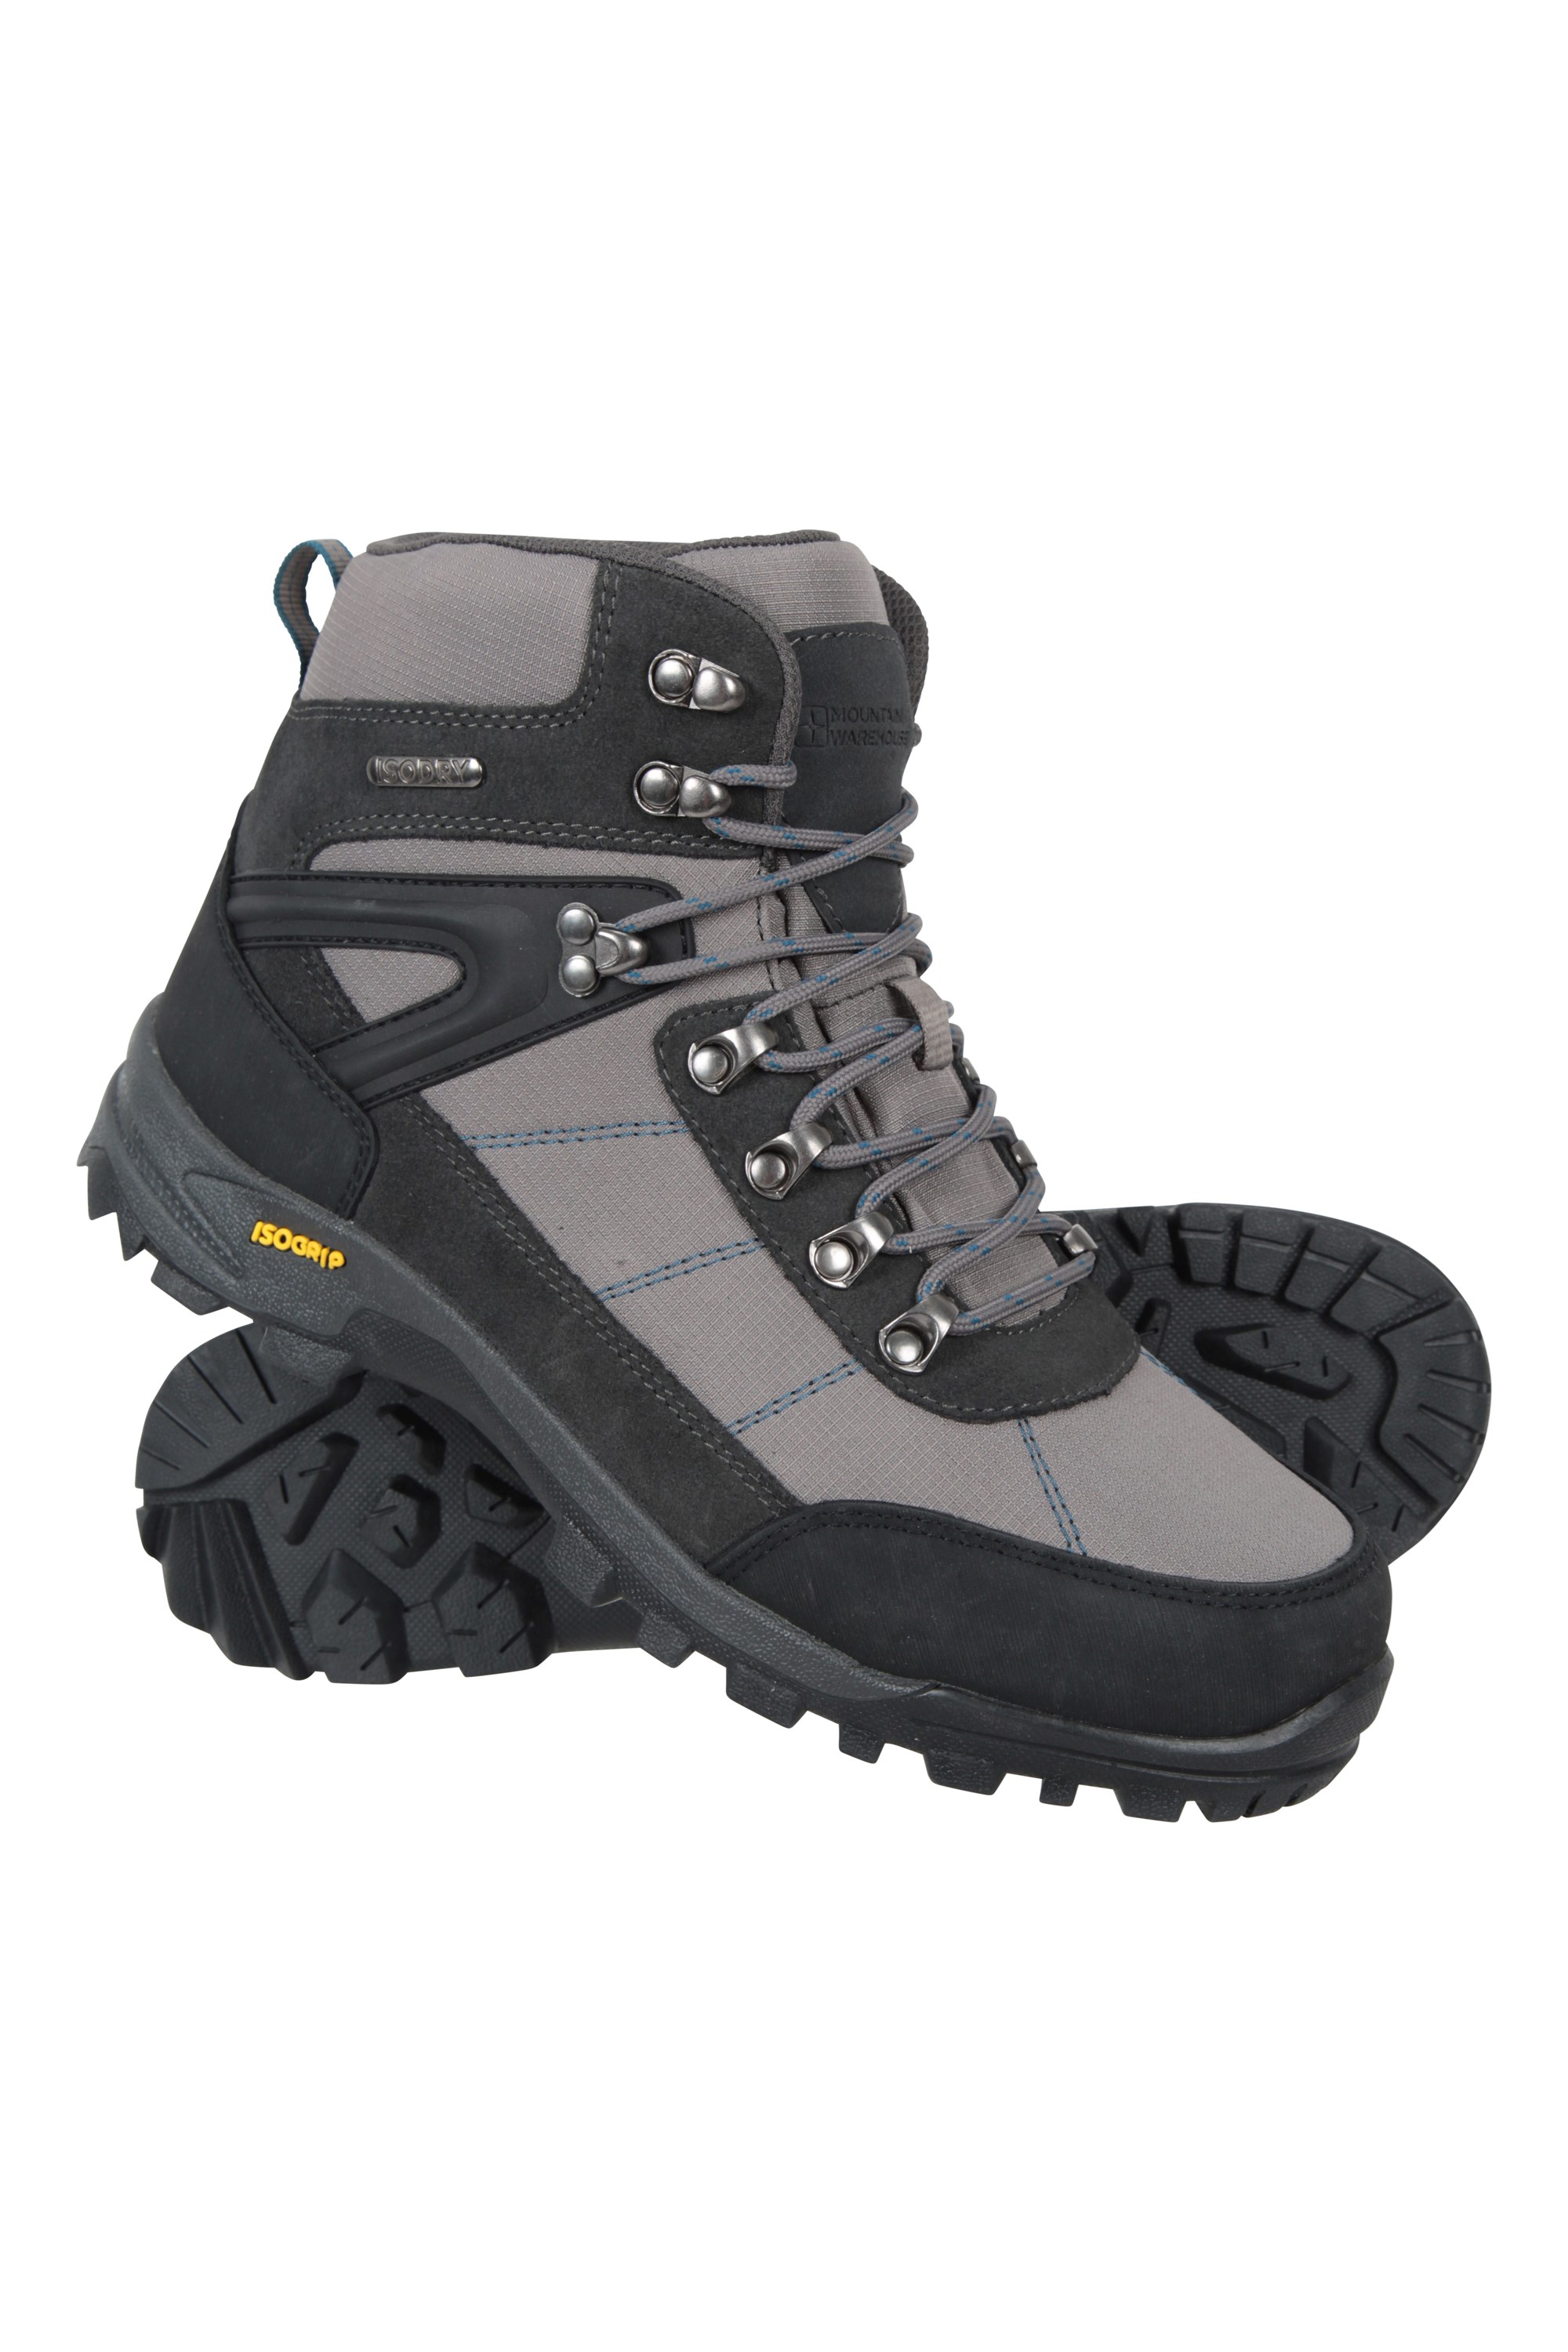 Storm Extreme Mens IsoGrip Waterproof Hiking Boots - Grey